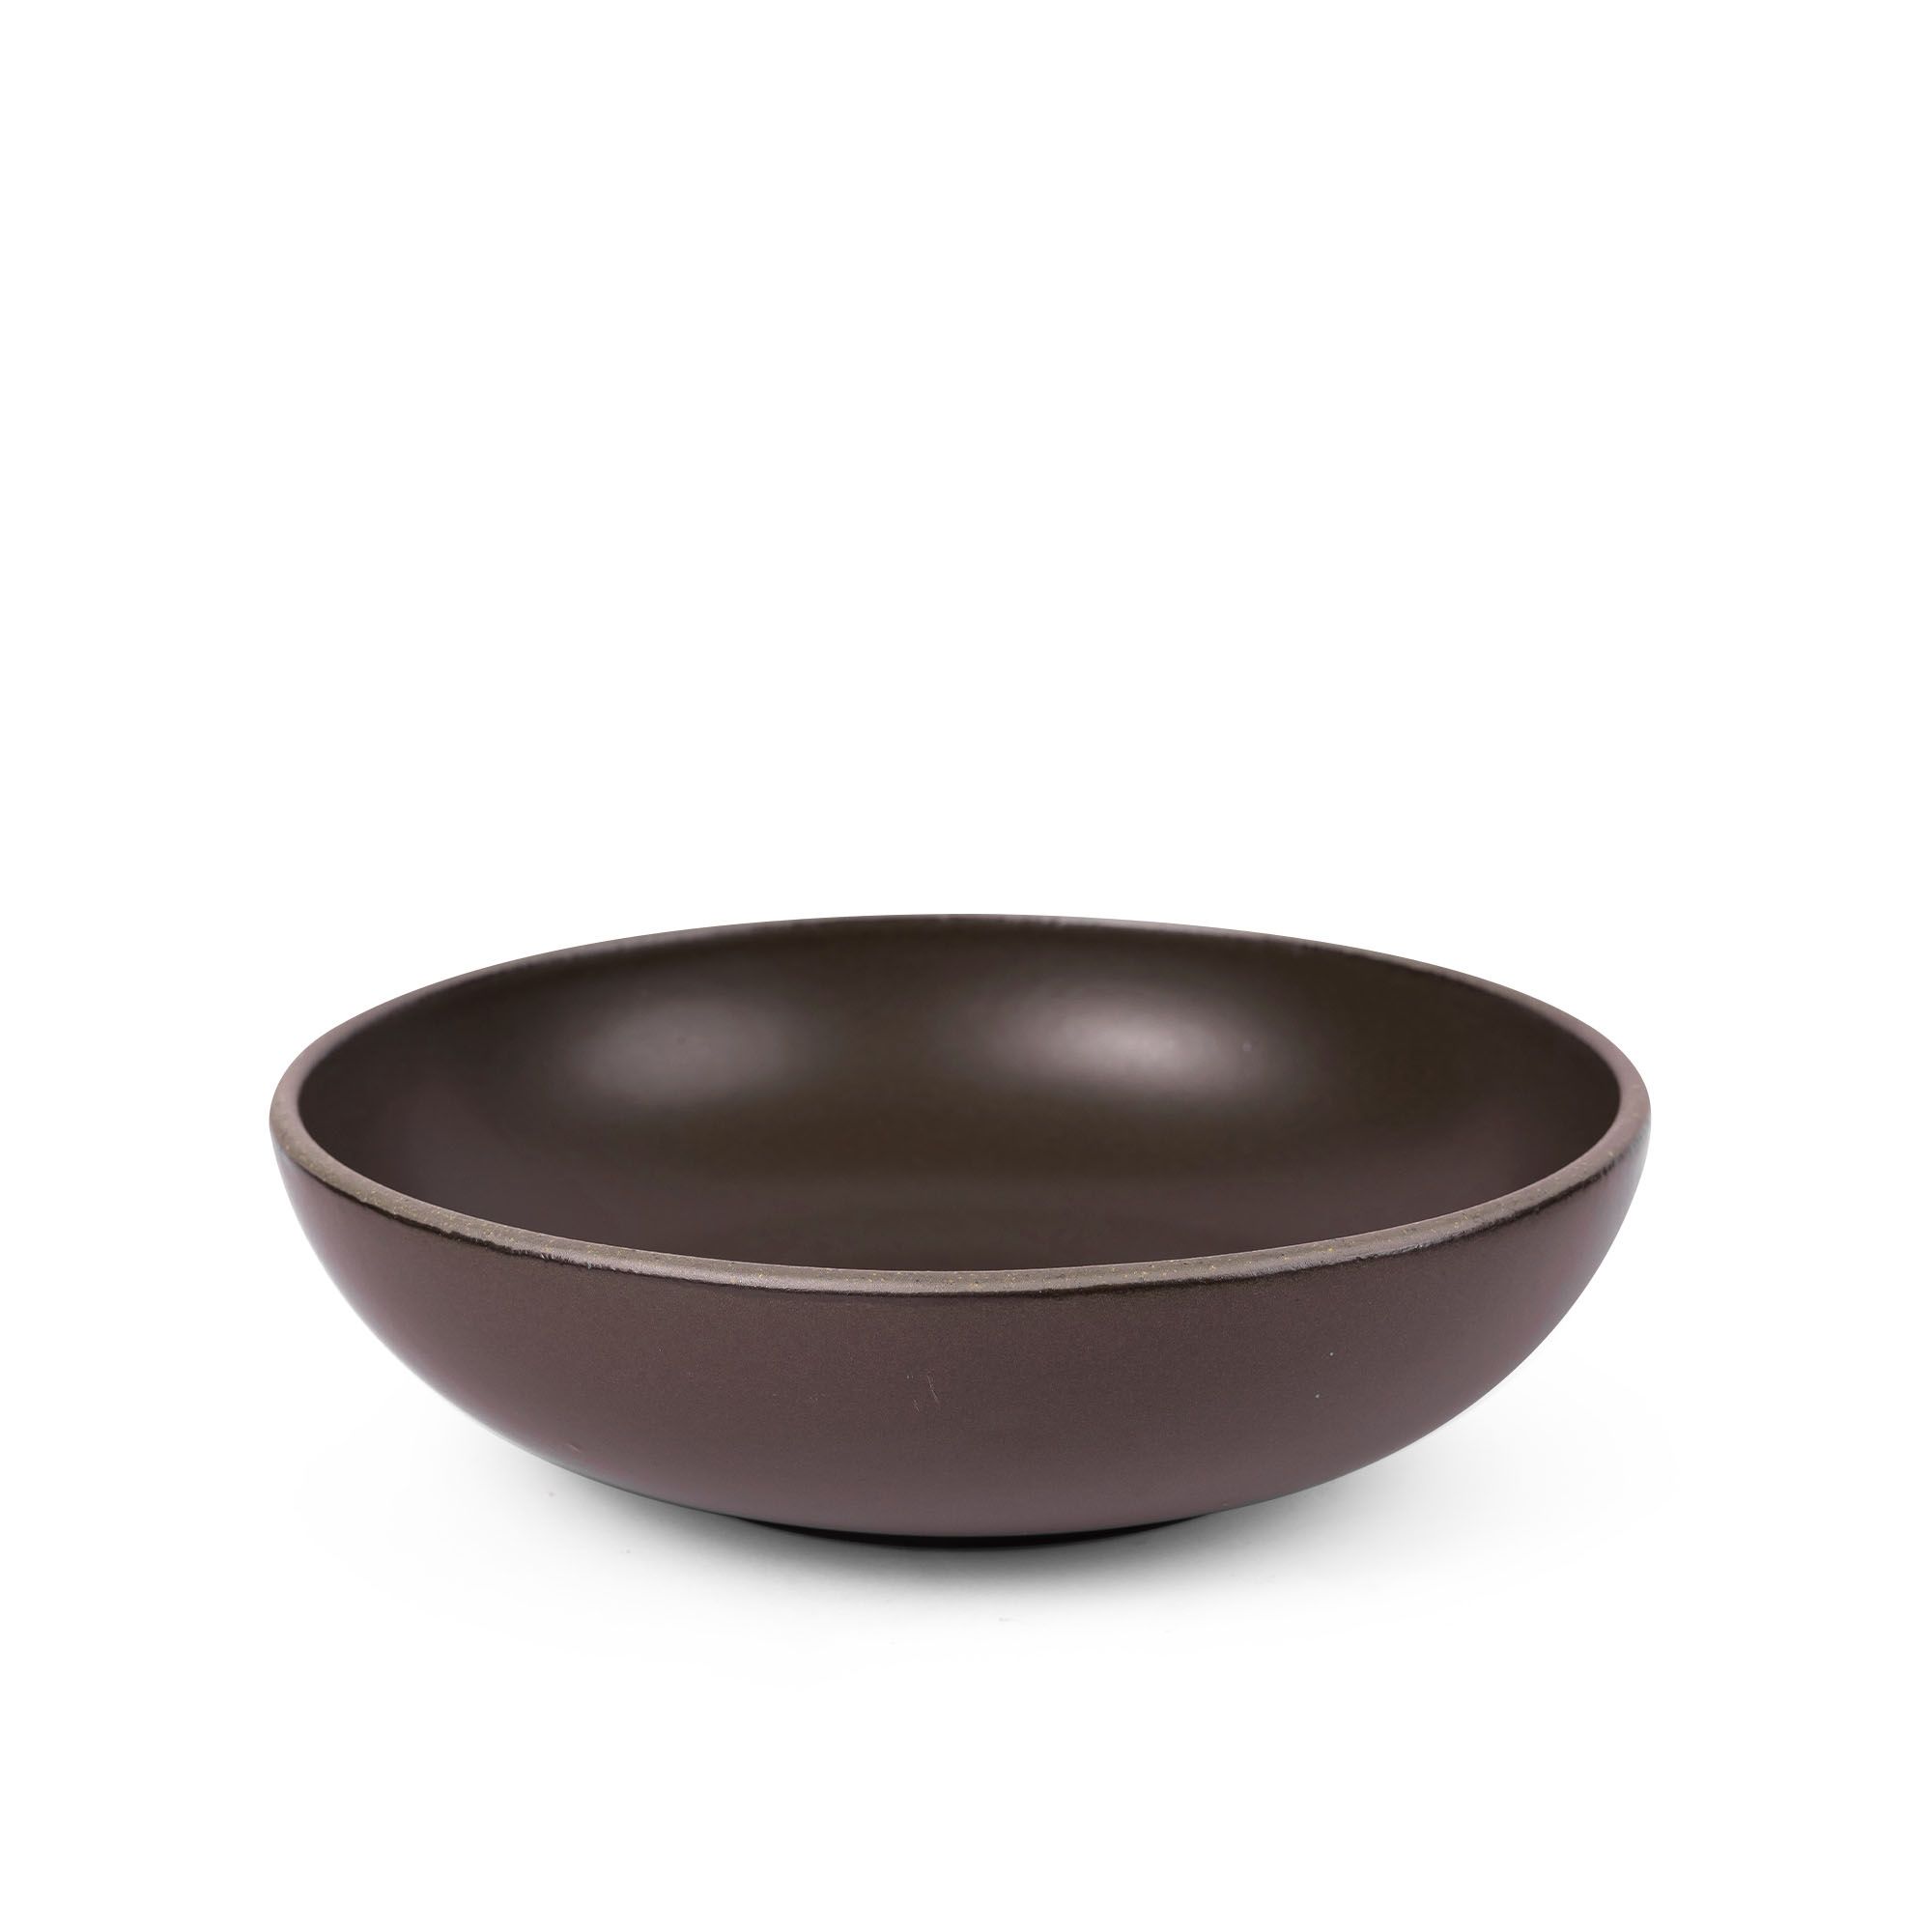 A large shallow serving ceramic bowl in a dark cool brown color featuring iron speckles and an unglazed rim.